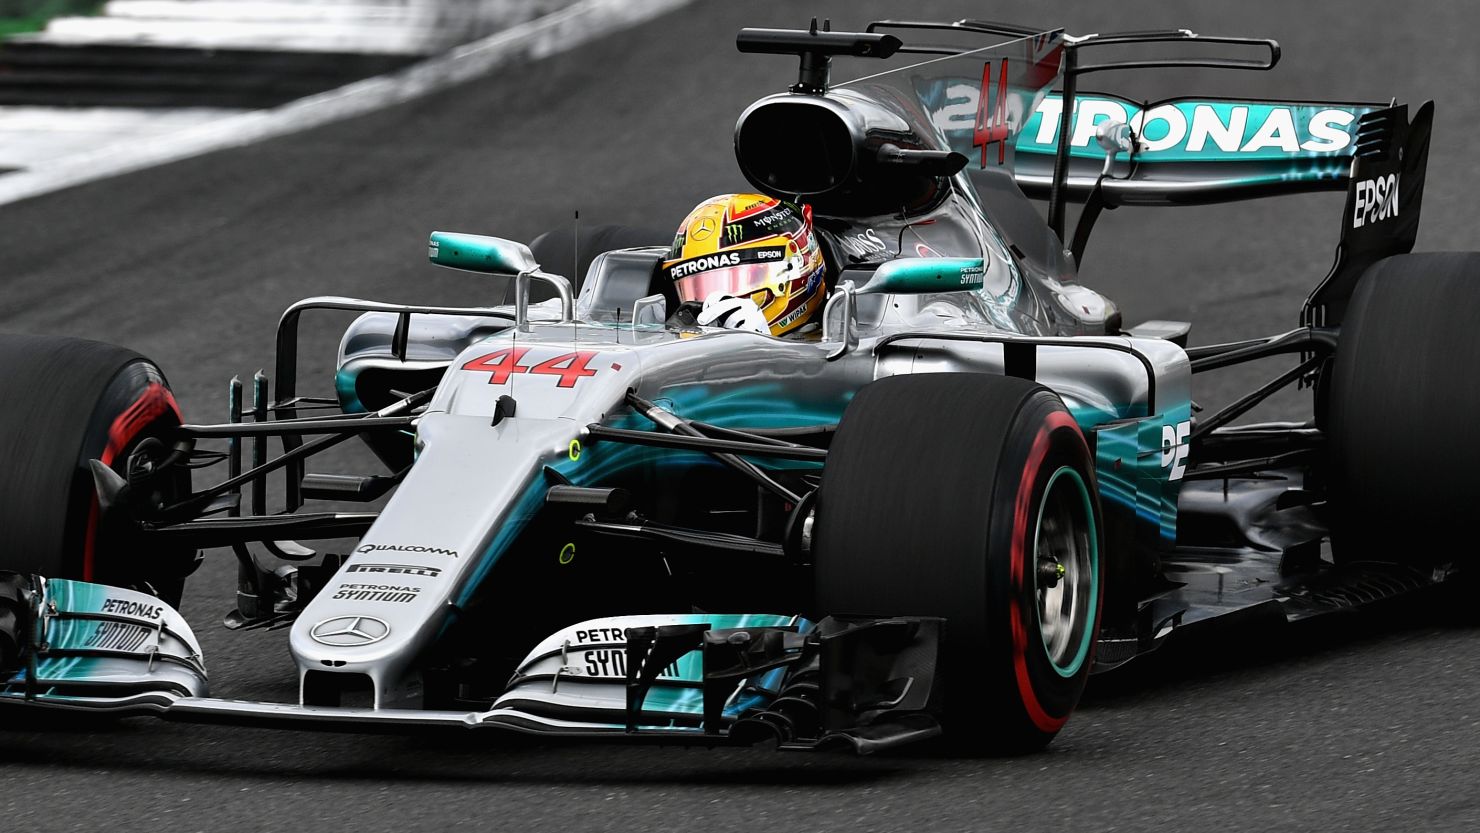 Lewis Hamilton led from start to finish at Silverstone to record his fourth straight victory at the British Grand Prix. 